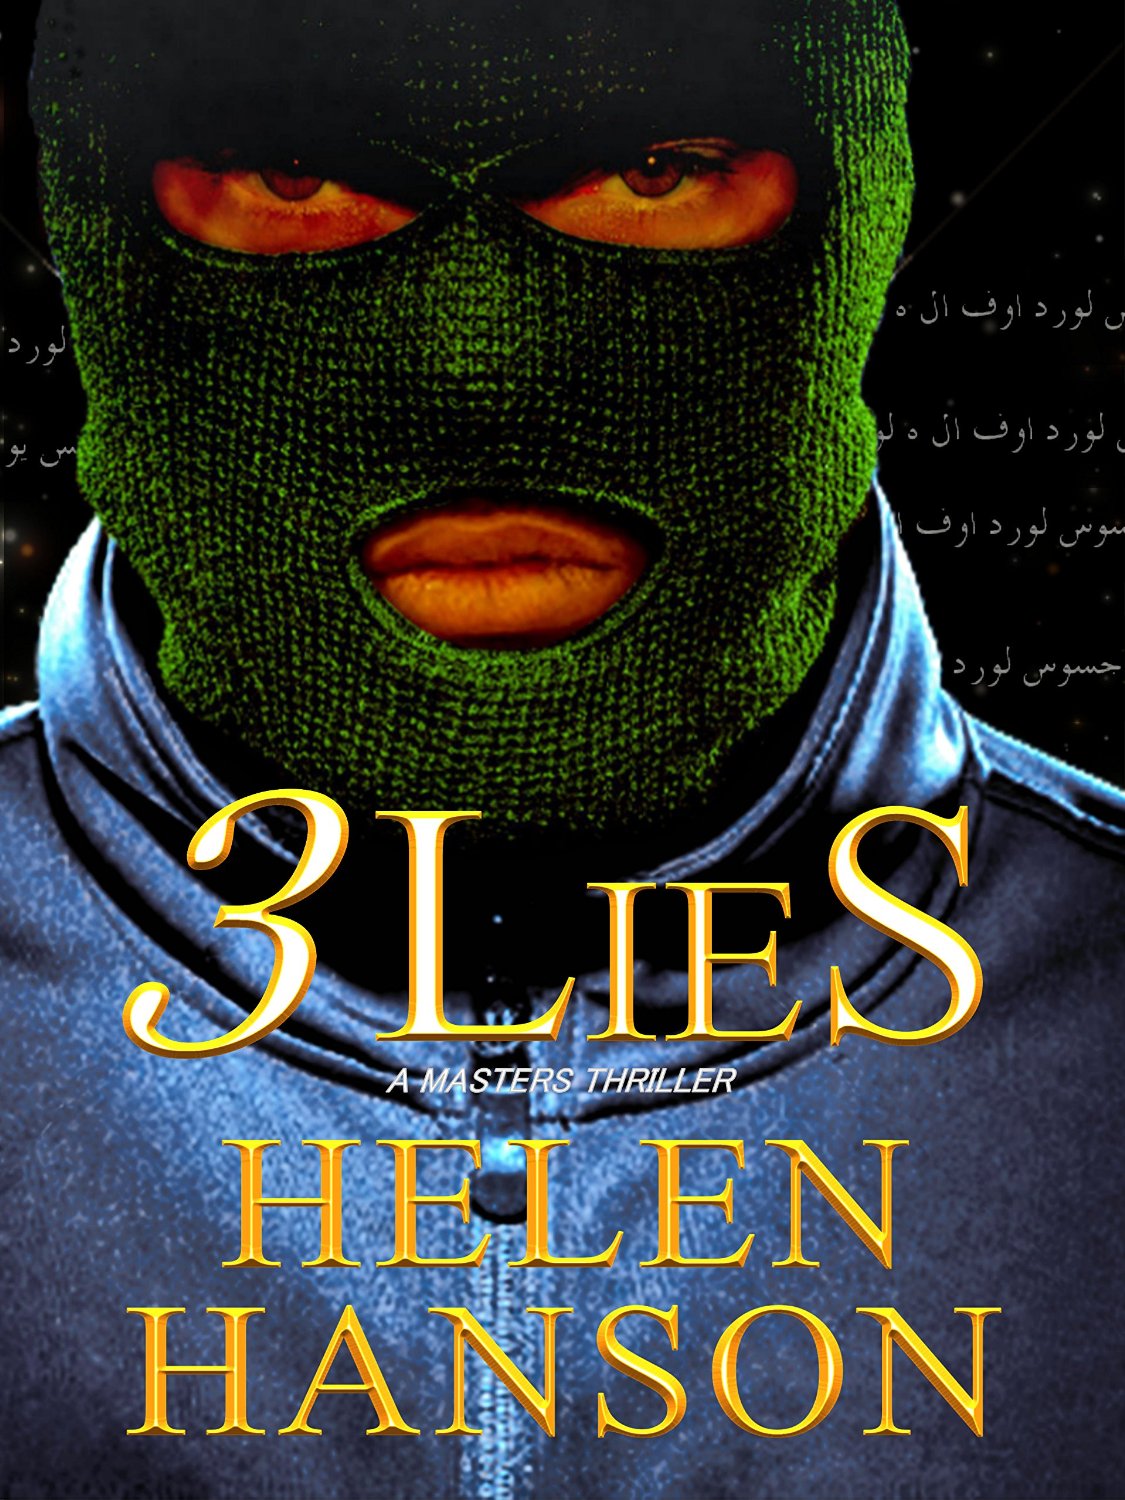 3 LIES: A Masters Thriller (The Masters CIA Thriller Series Book 1) by Helen Hanson